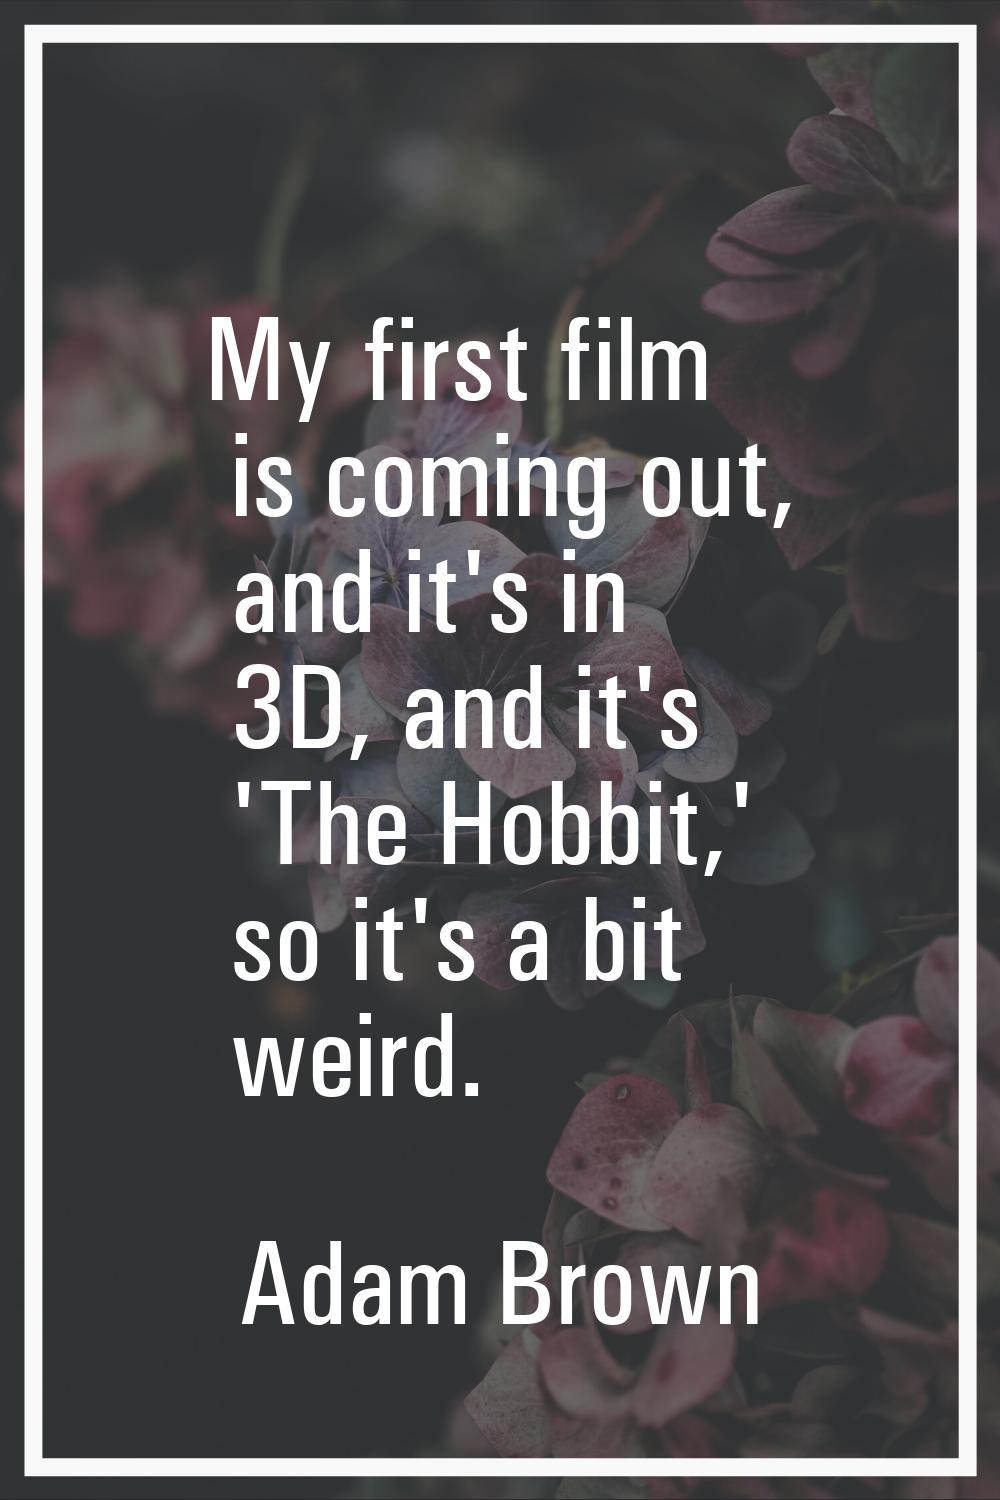 My first film is coming out, and it's in 3D, and it's 'The Hobbit,' so it's a bit weird.